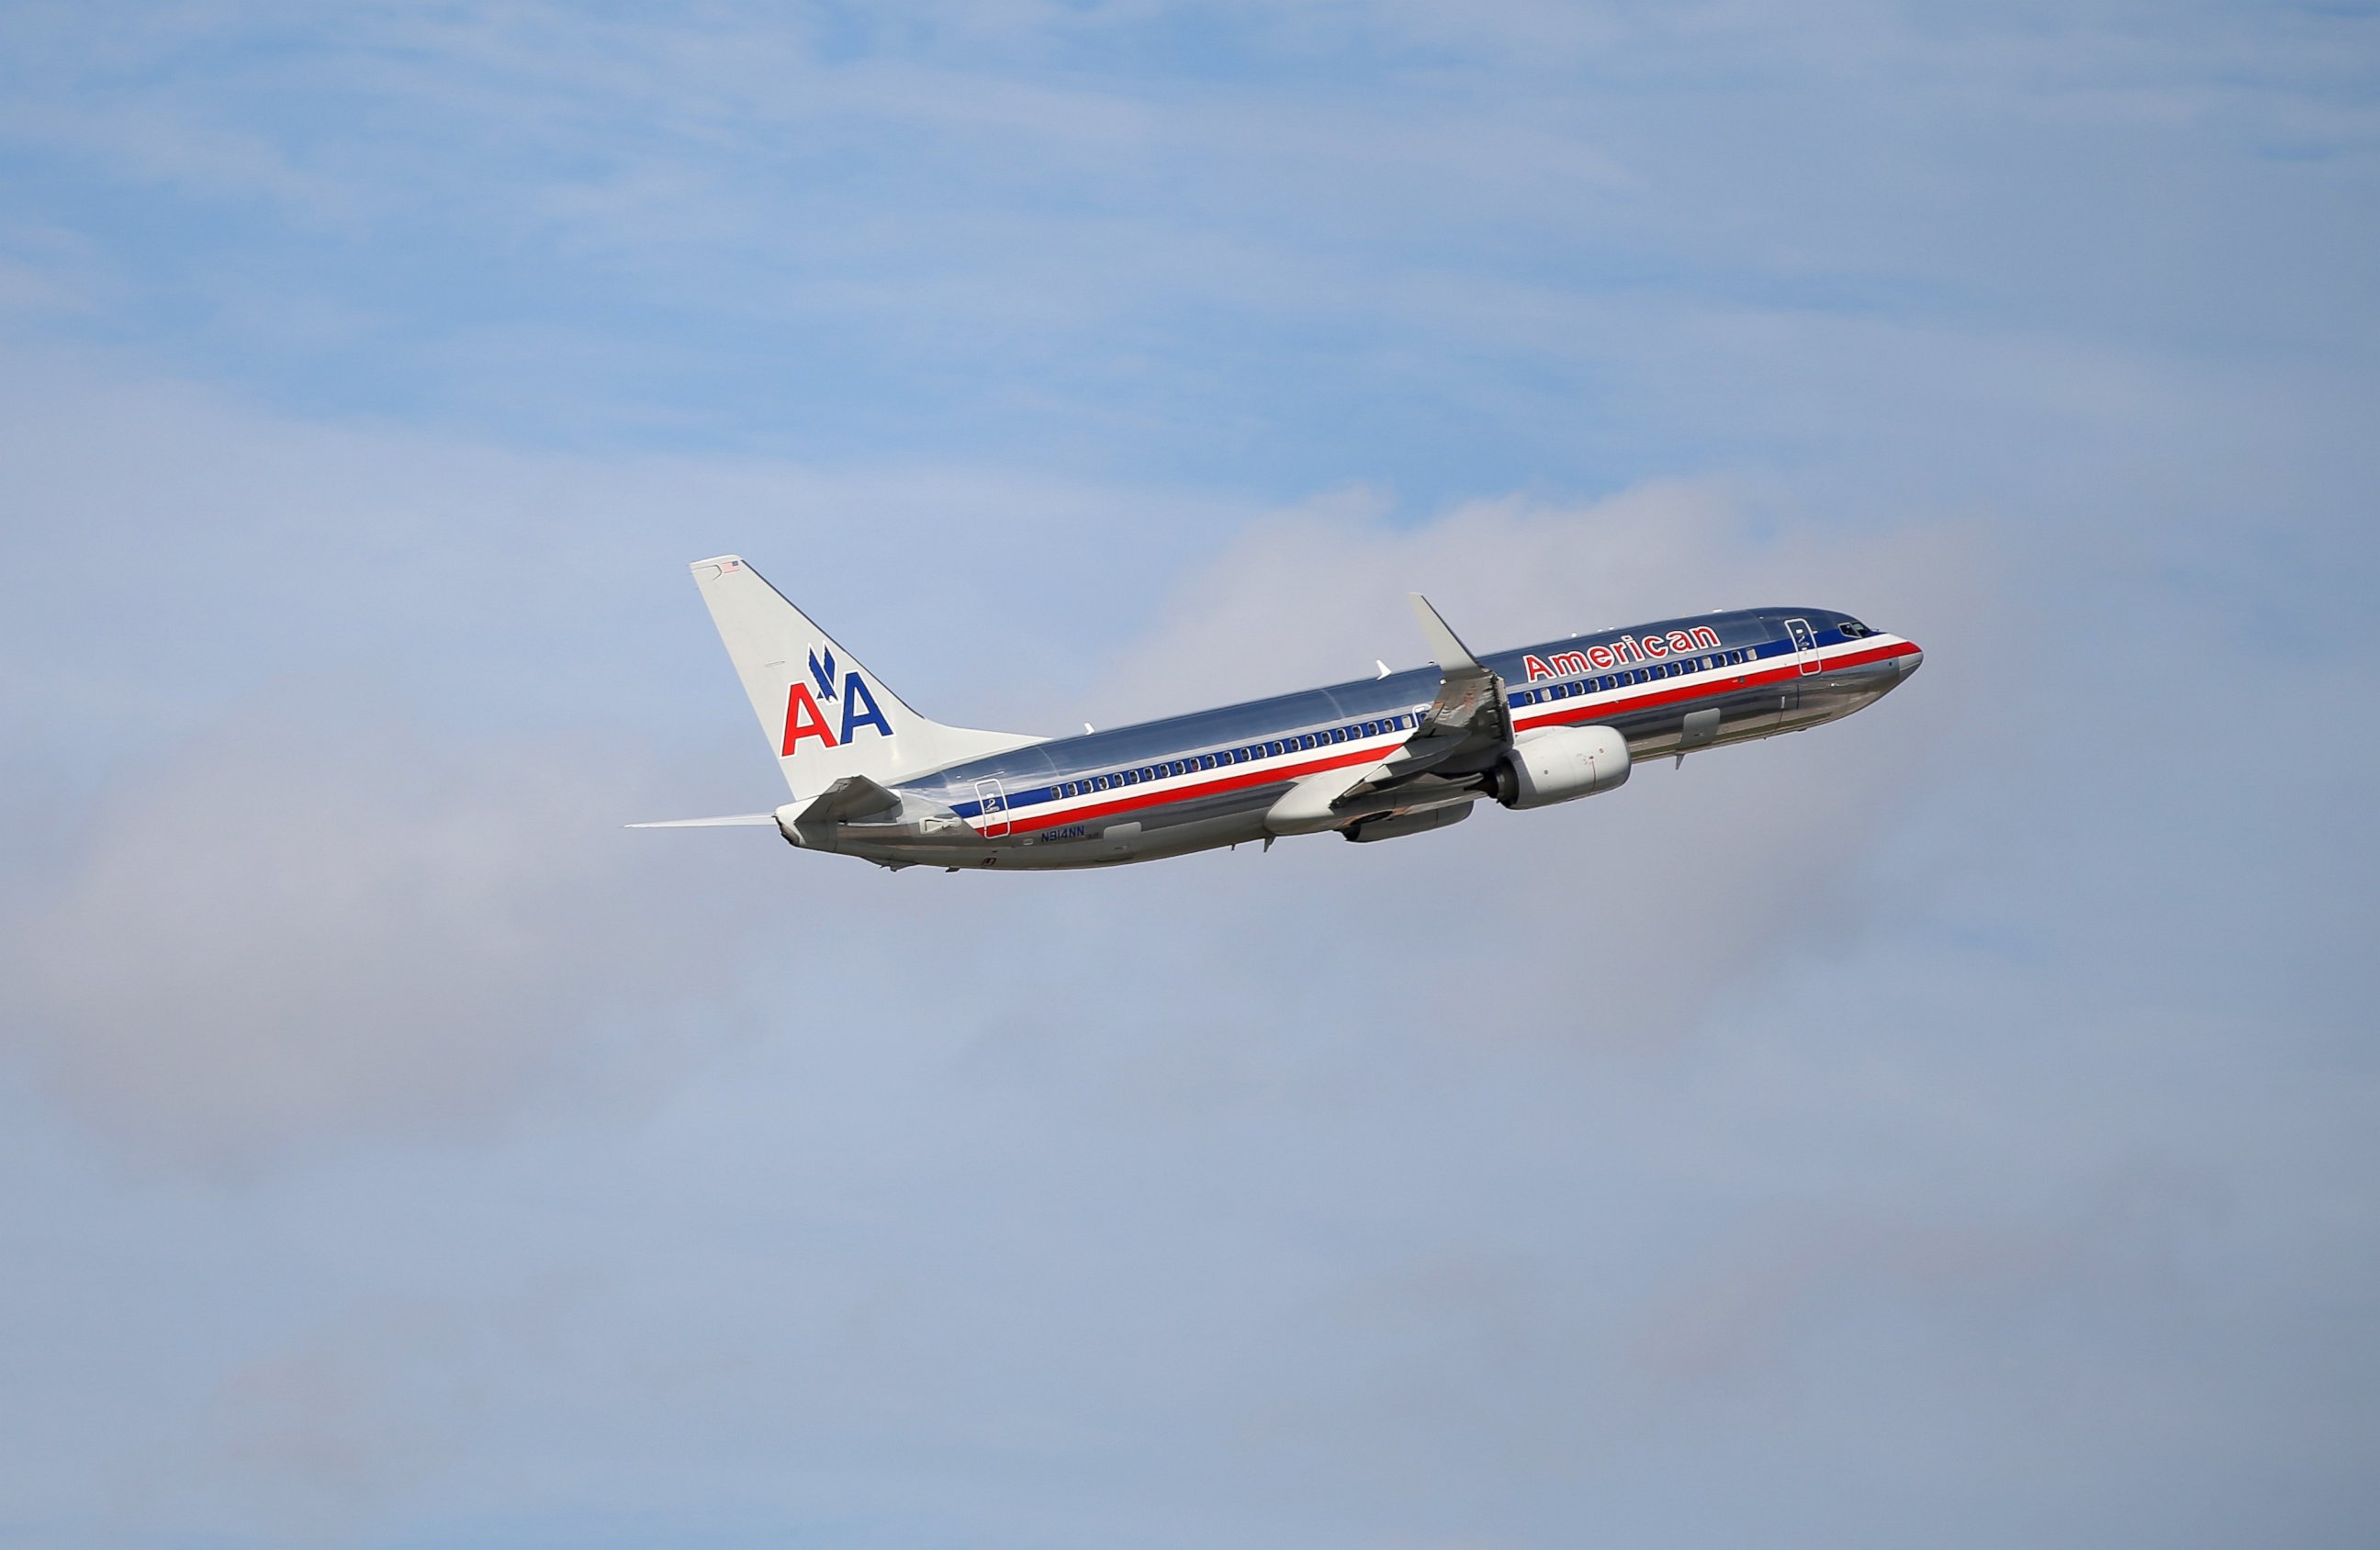 PHOTO: An American Airlines plane takes off from the Miami International Airport, Nov. 12, 2013 in Miami.